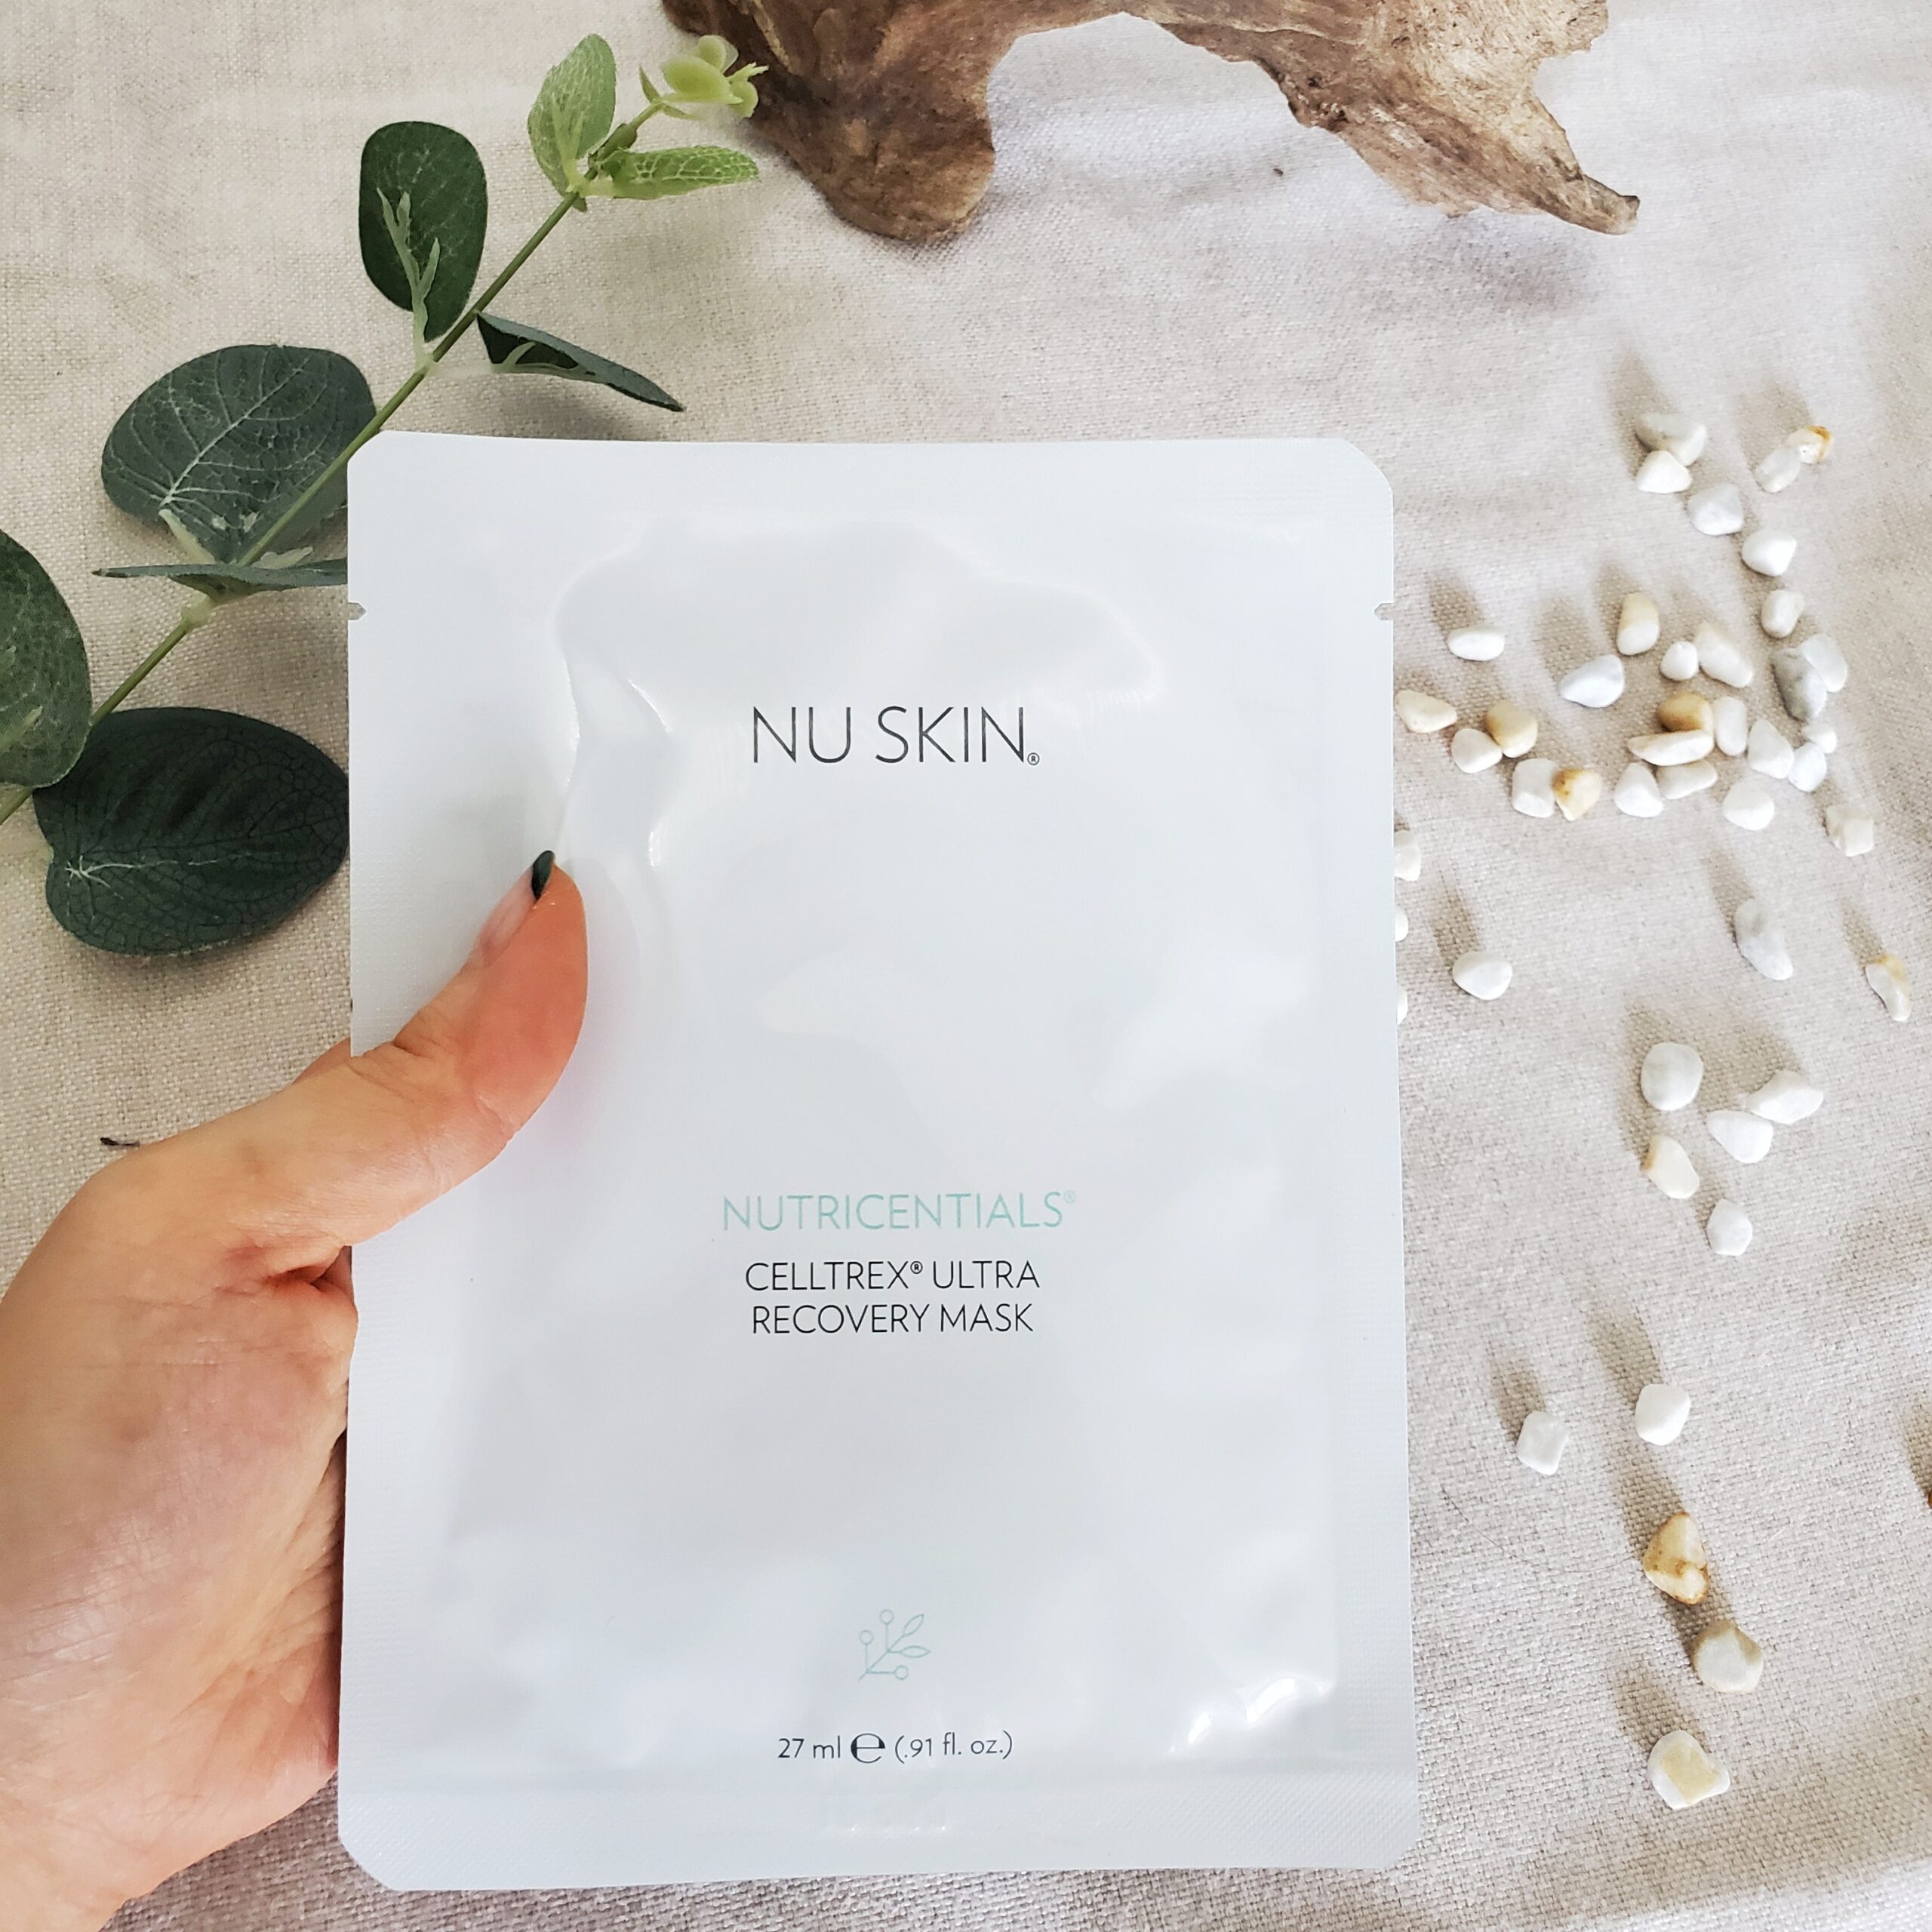 Nu Skin Nutricentials Celltrex Ultra Recovery Mask Review